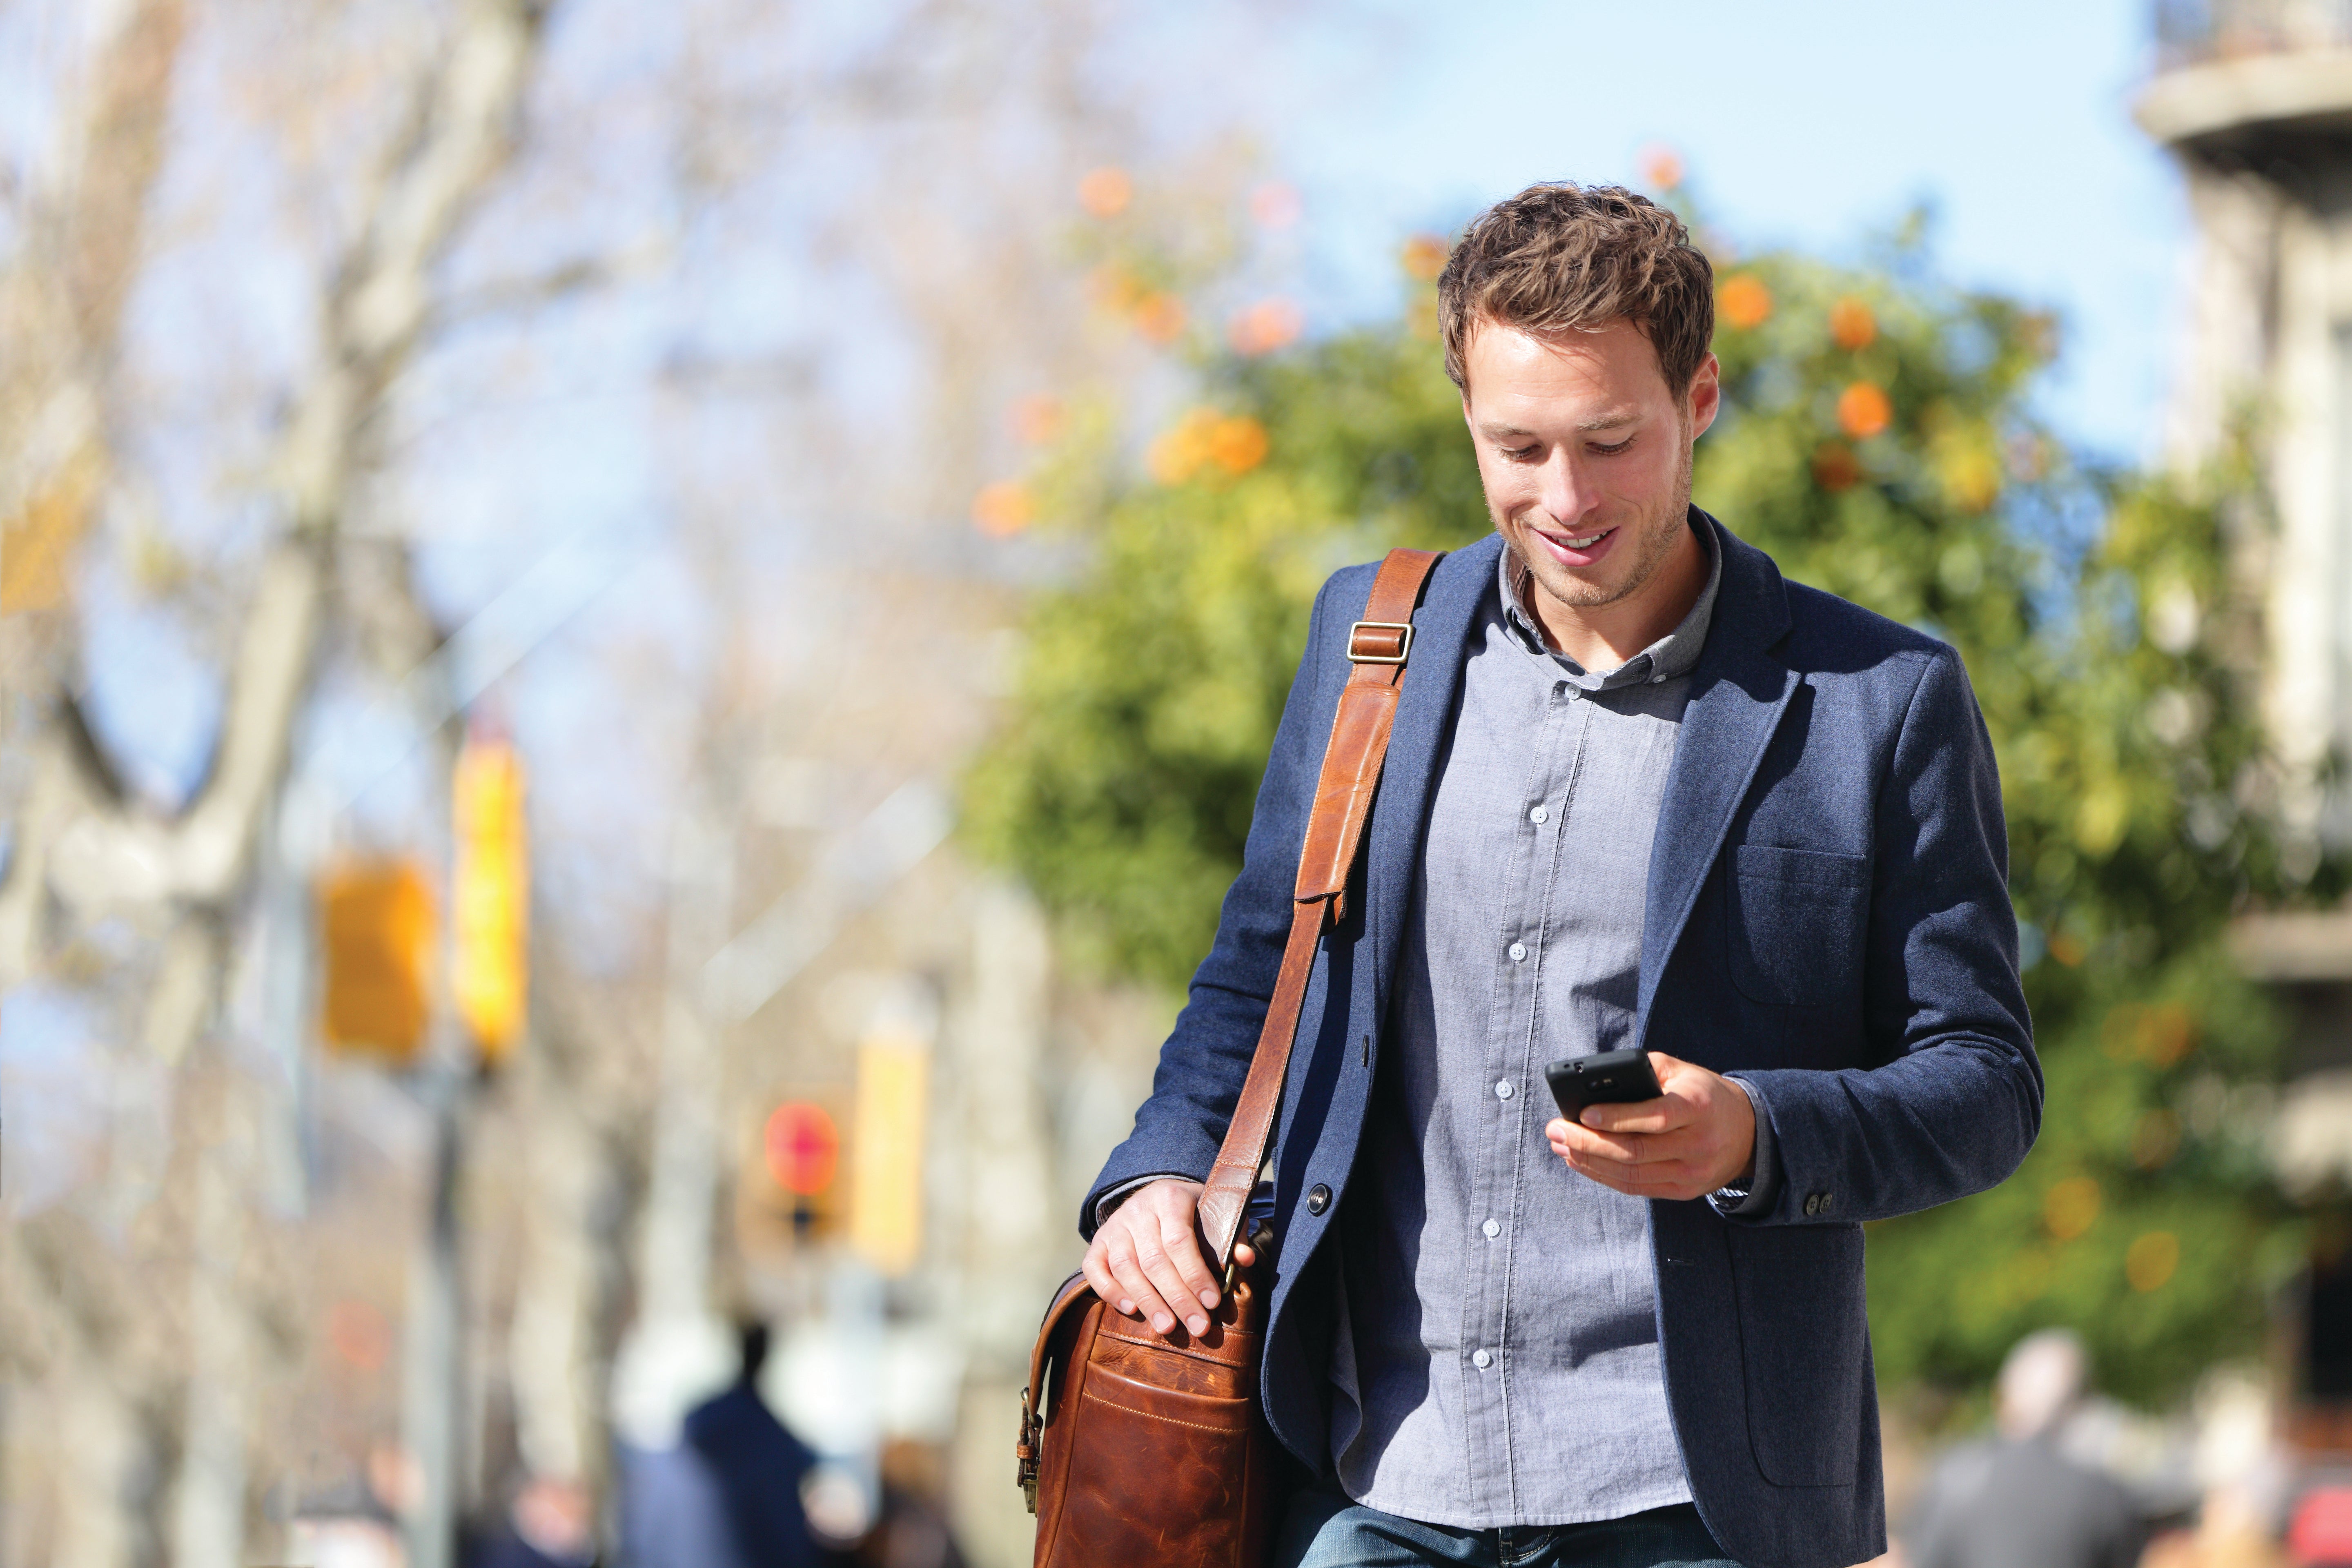 Young urban businessman professional on smartphone walking in street using mobile phone app texting sms message on smartphone wearing smart casual jacket. City lifestyle commute person walking.; Shutterstock ID 501680404; Job: none; Quickbase: none; Dept: none ; email: tom